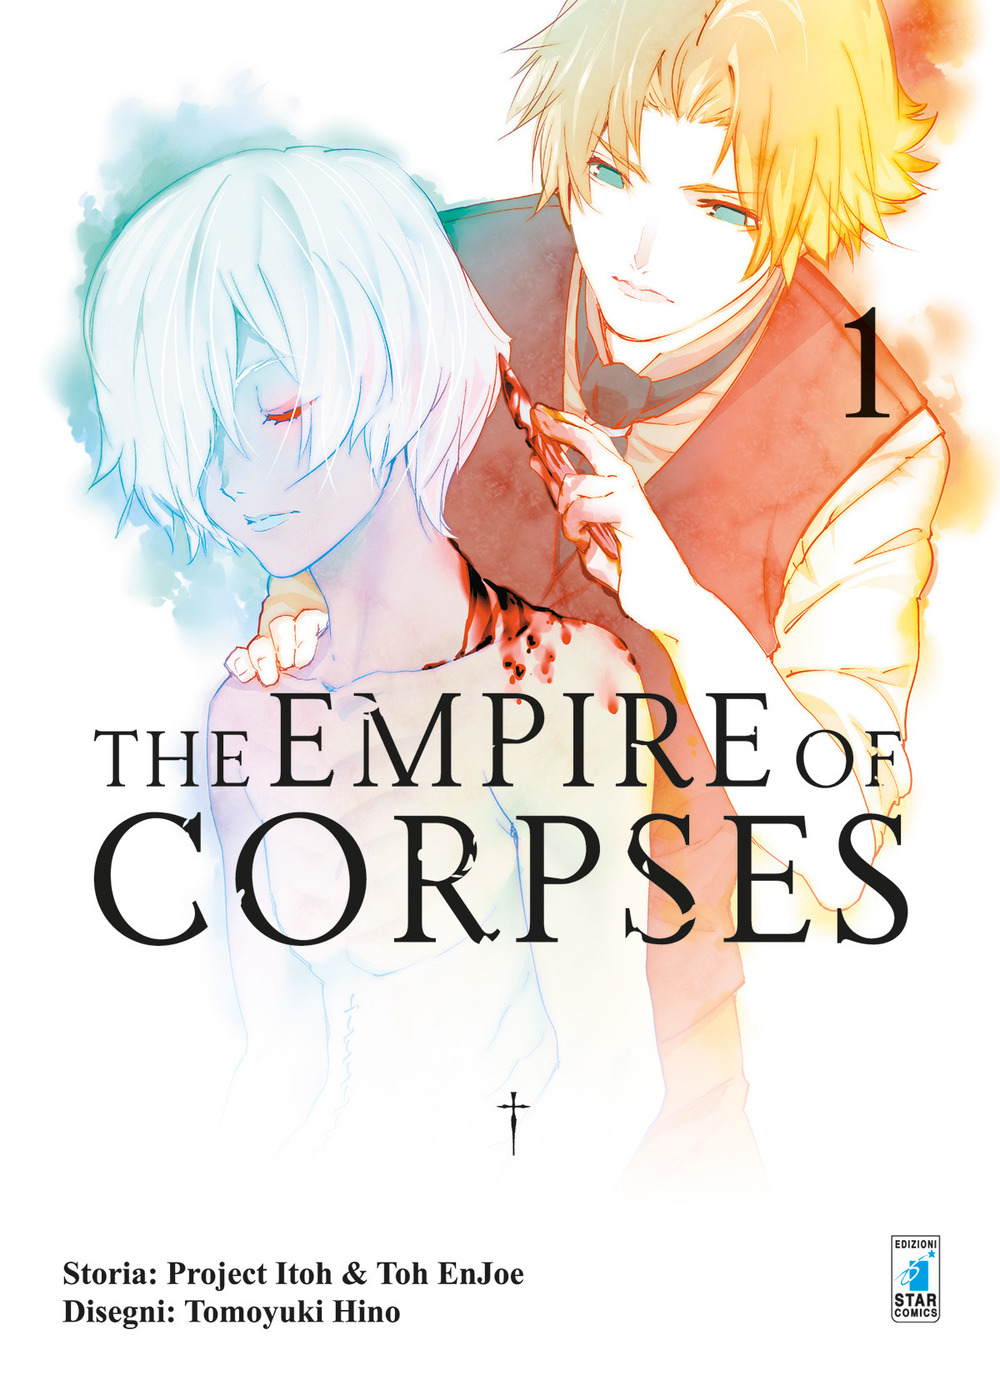 The empire of corpses. Vol. 1